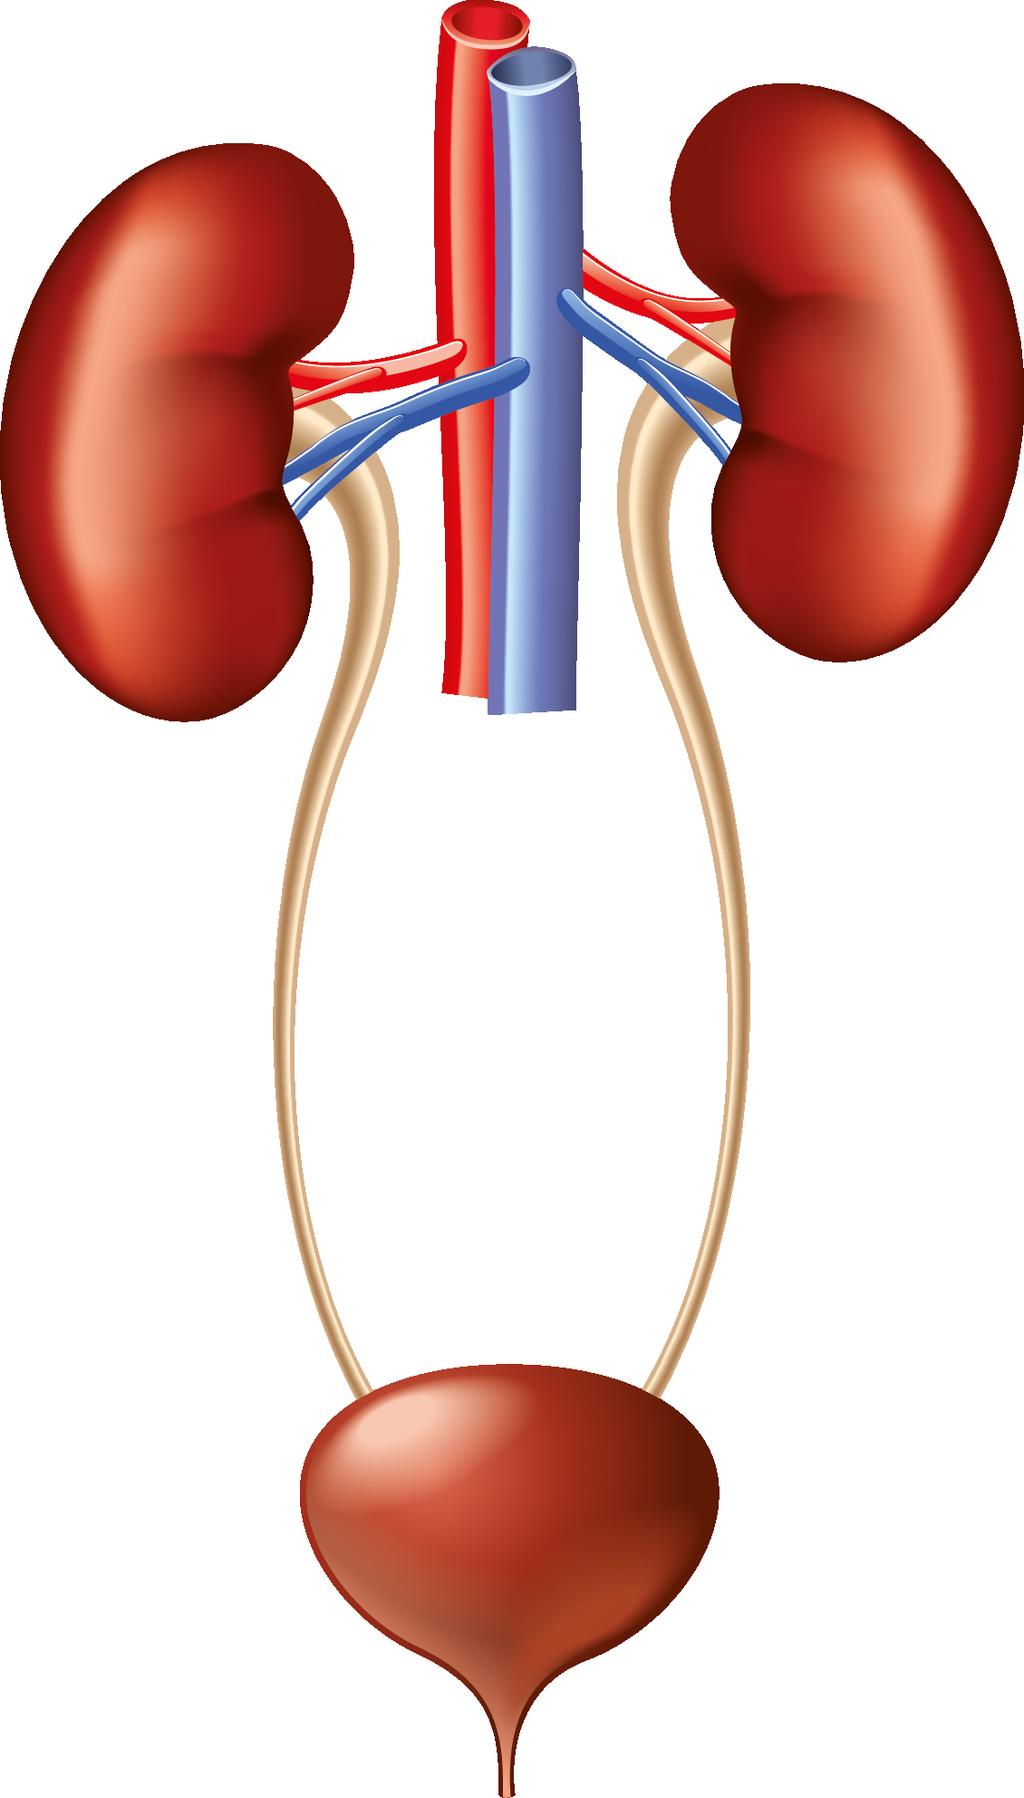 2 The Bladder The Bladder The Urinary System The urinary system consists of: Kidneys Ureters Bladder Urethra.